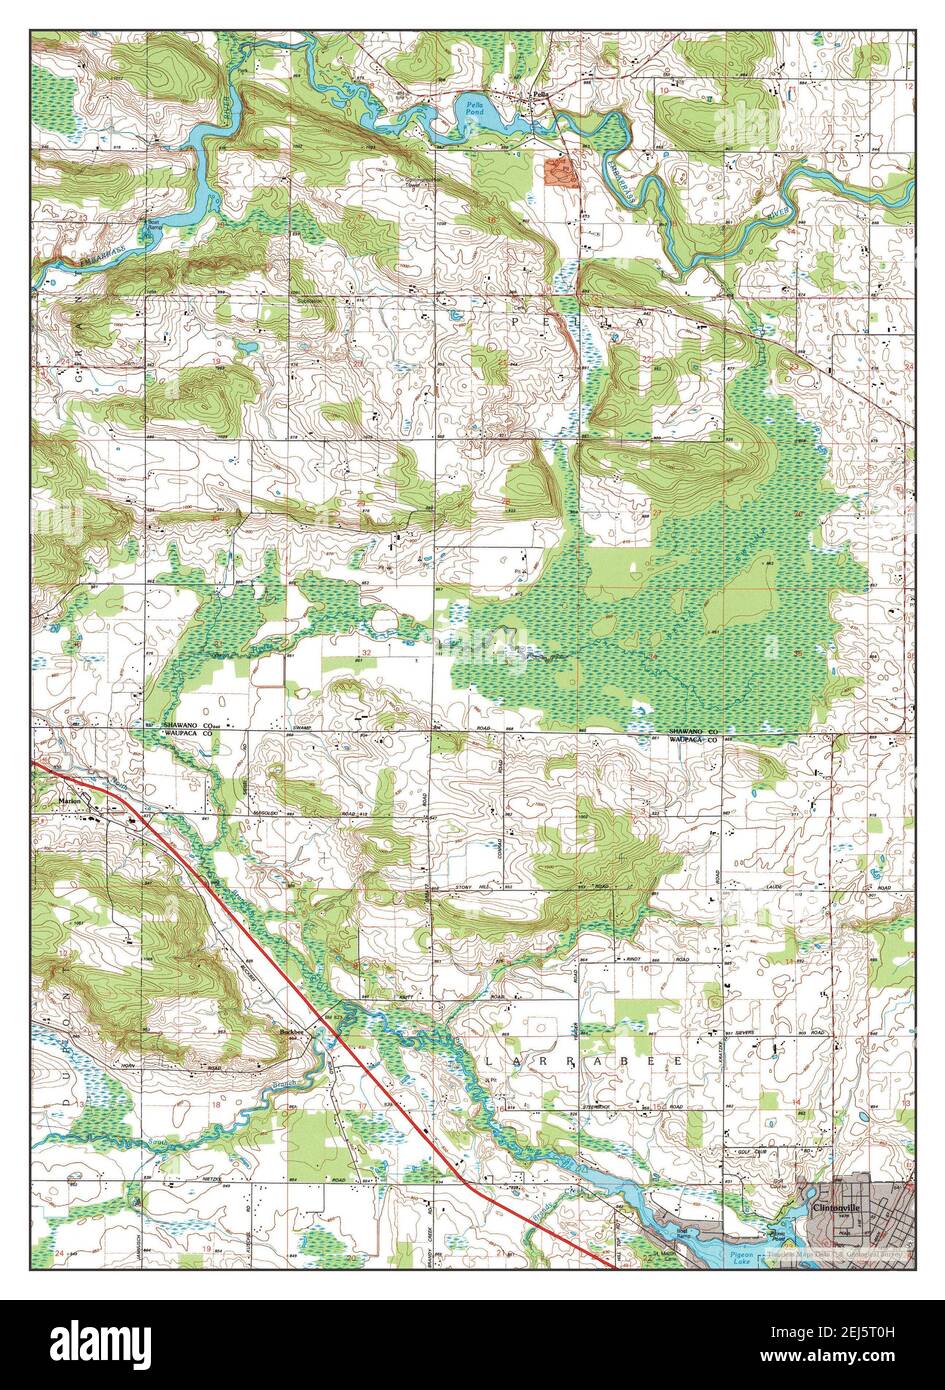 Clintonville North, Wisconsin, map 1993, 1:24000, United States of America by Timeless Maps, data U.S. Geological Survey Stock Photo